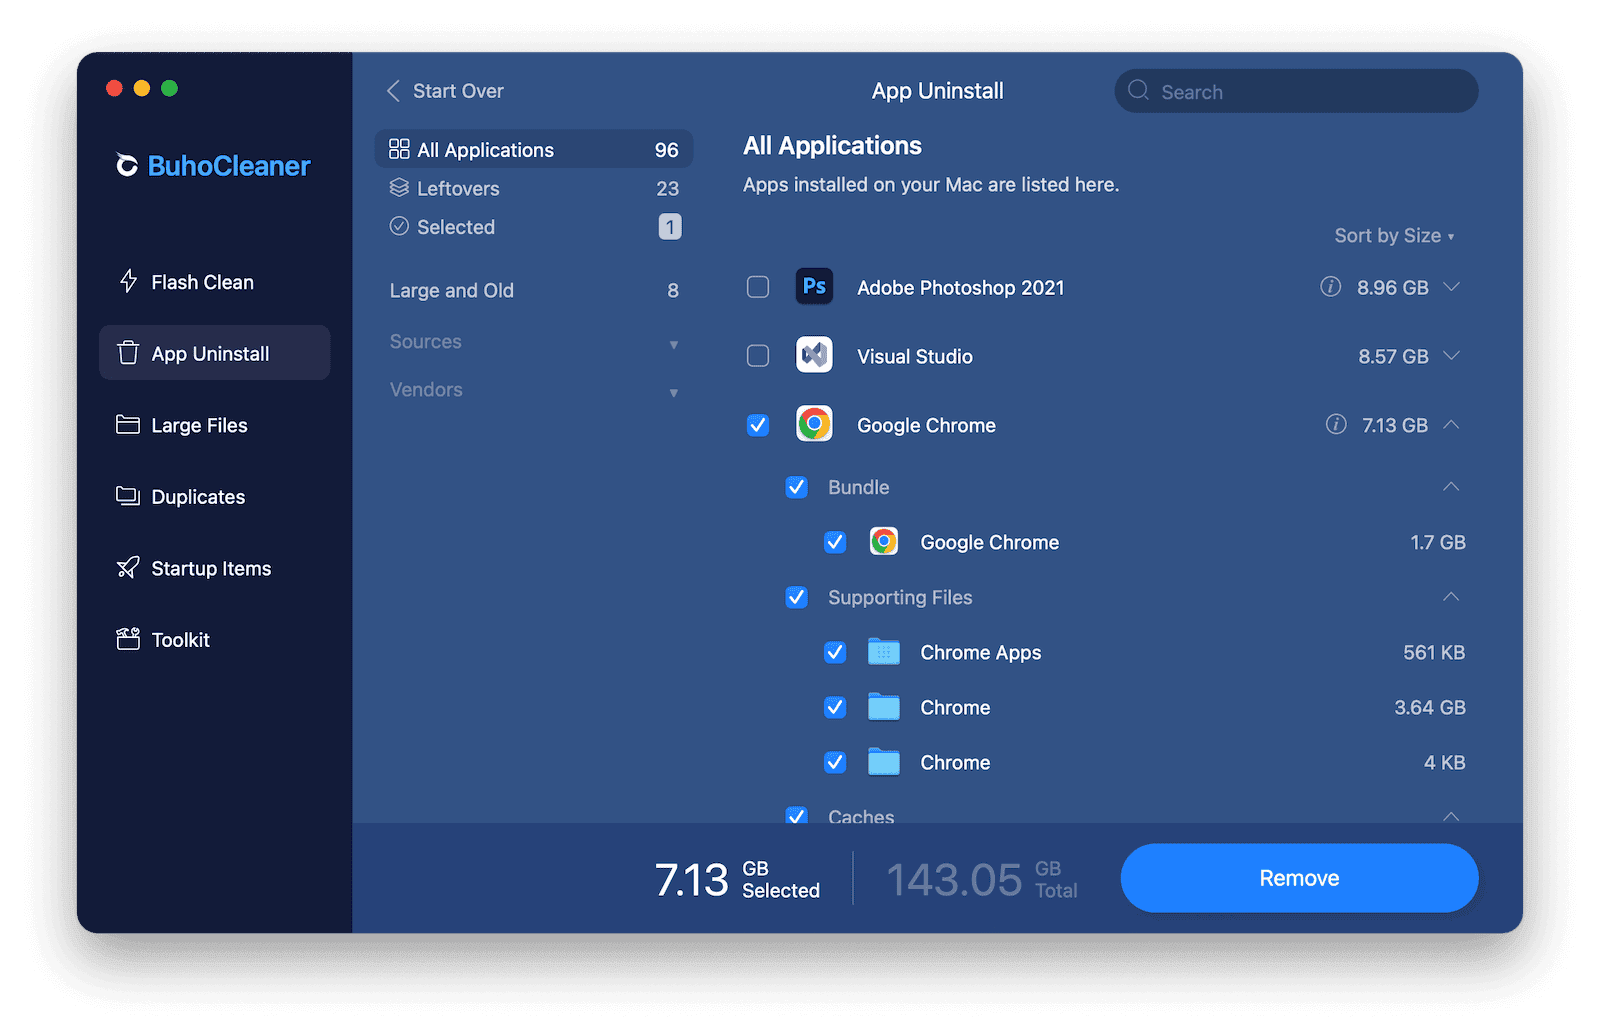 Quickly Uninstall Apps on Mac with BuhoCleaner